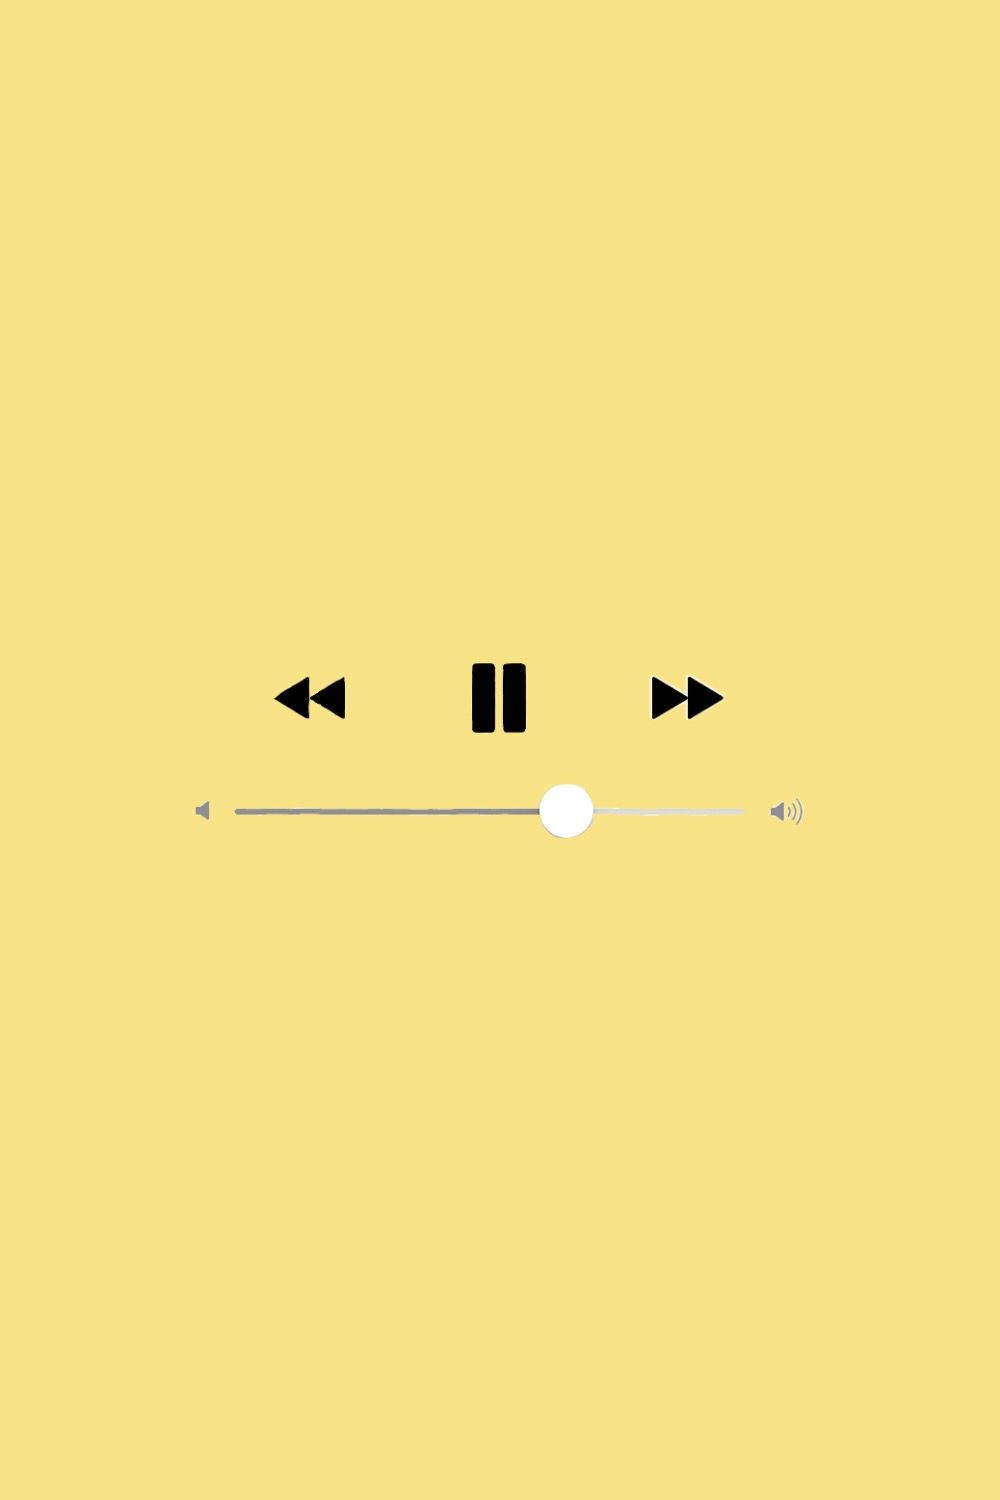 Aesthetic Music Player In Yellow Background